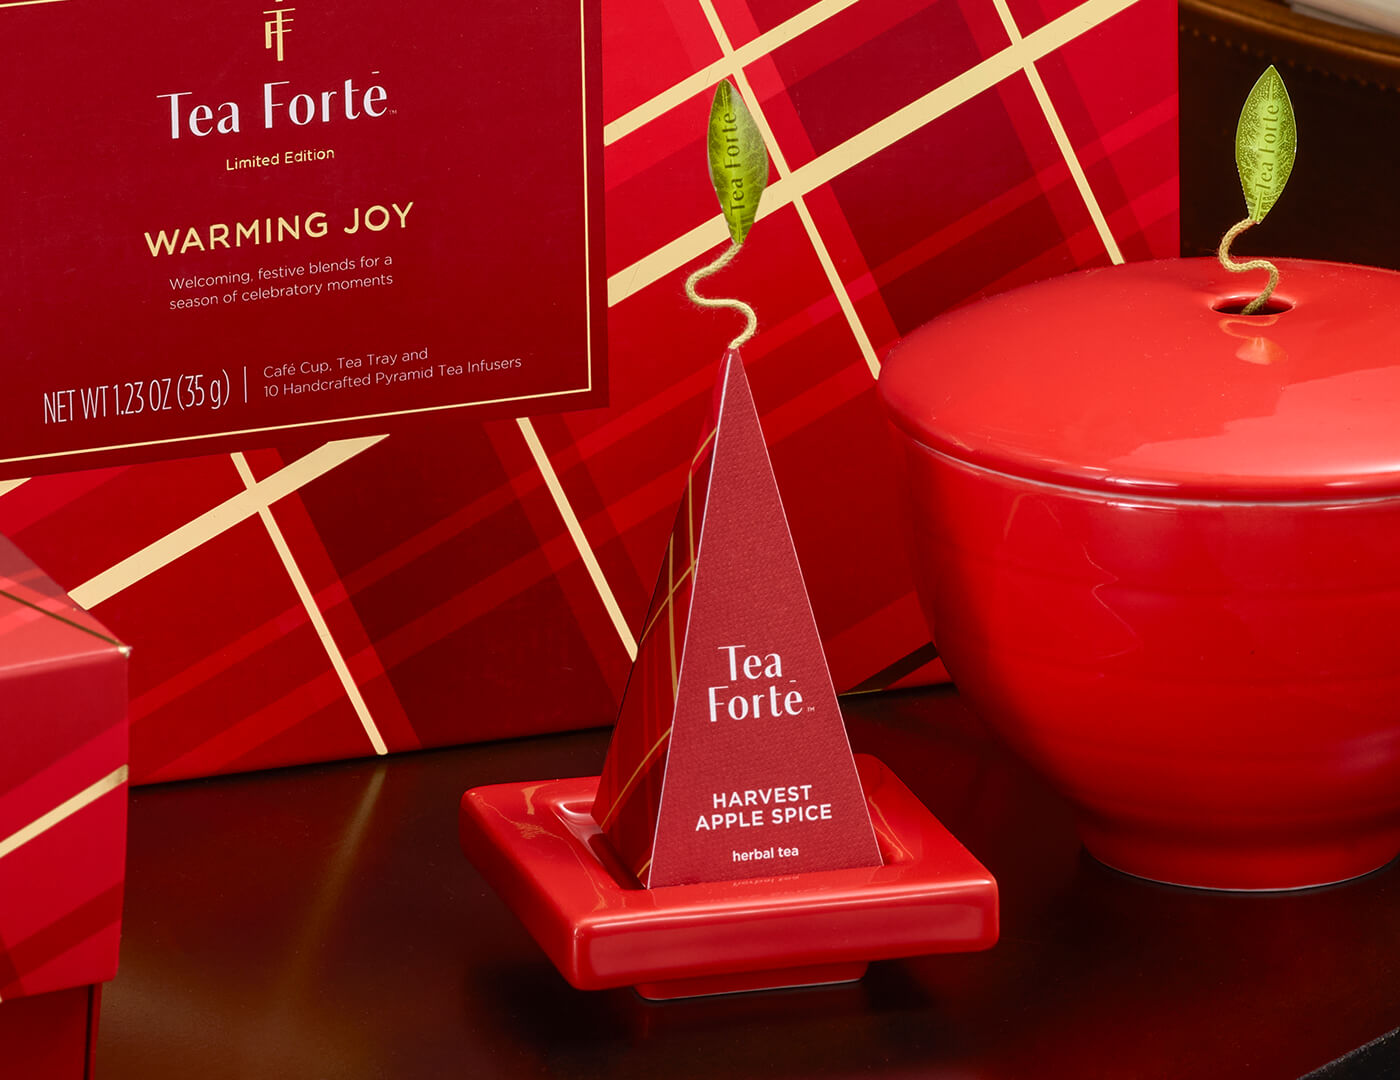 Ruby Red Tea Tray with infuser perched on top resting on festive table with a Ruby Red Café Cup and Warming Joy Gift Set